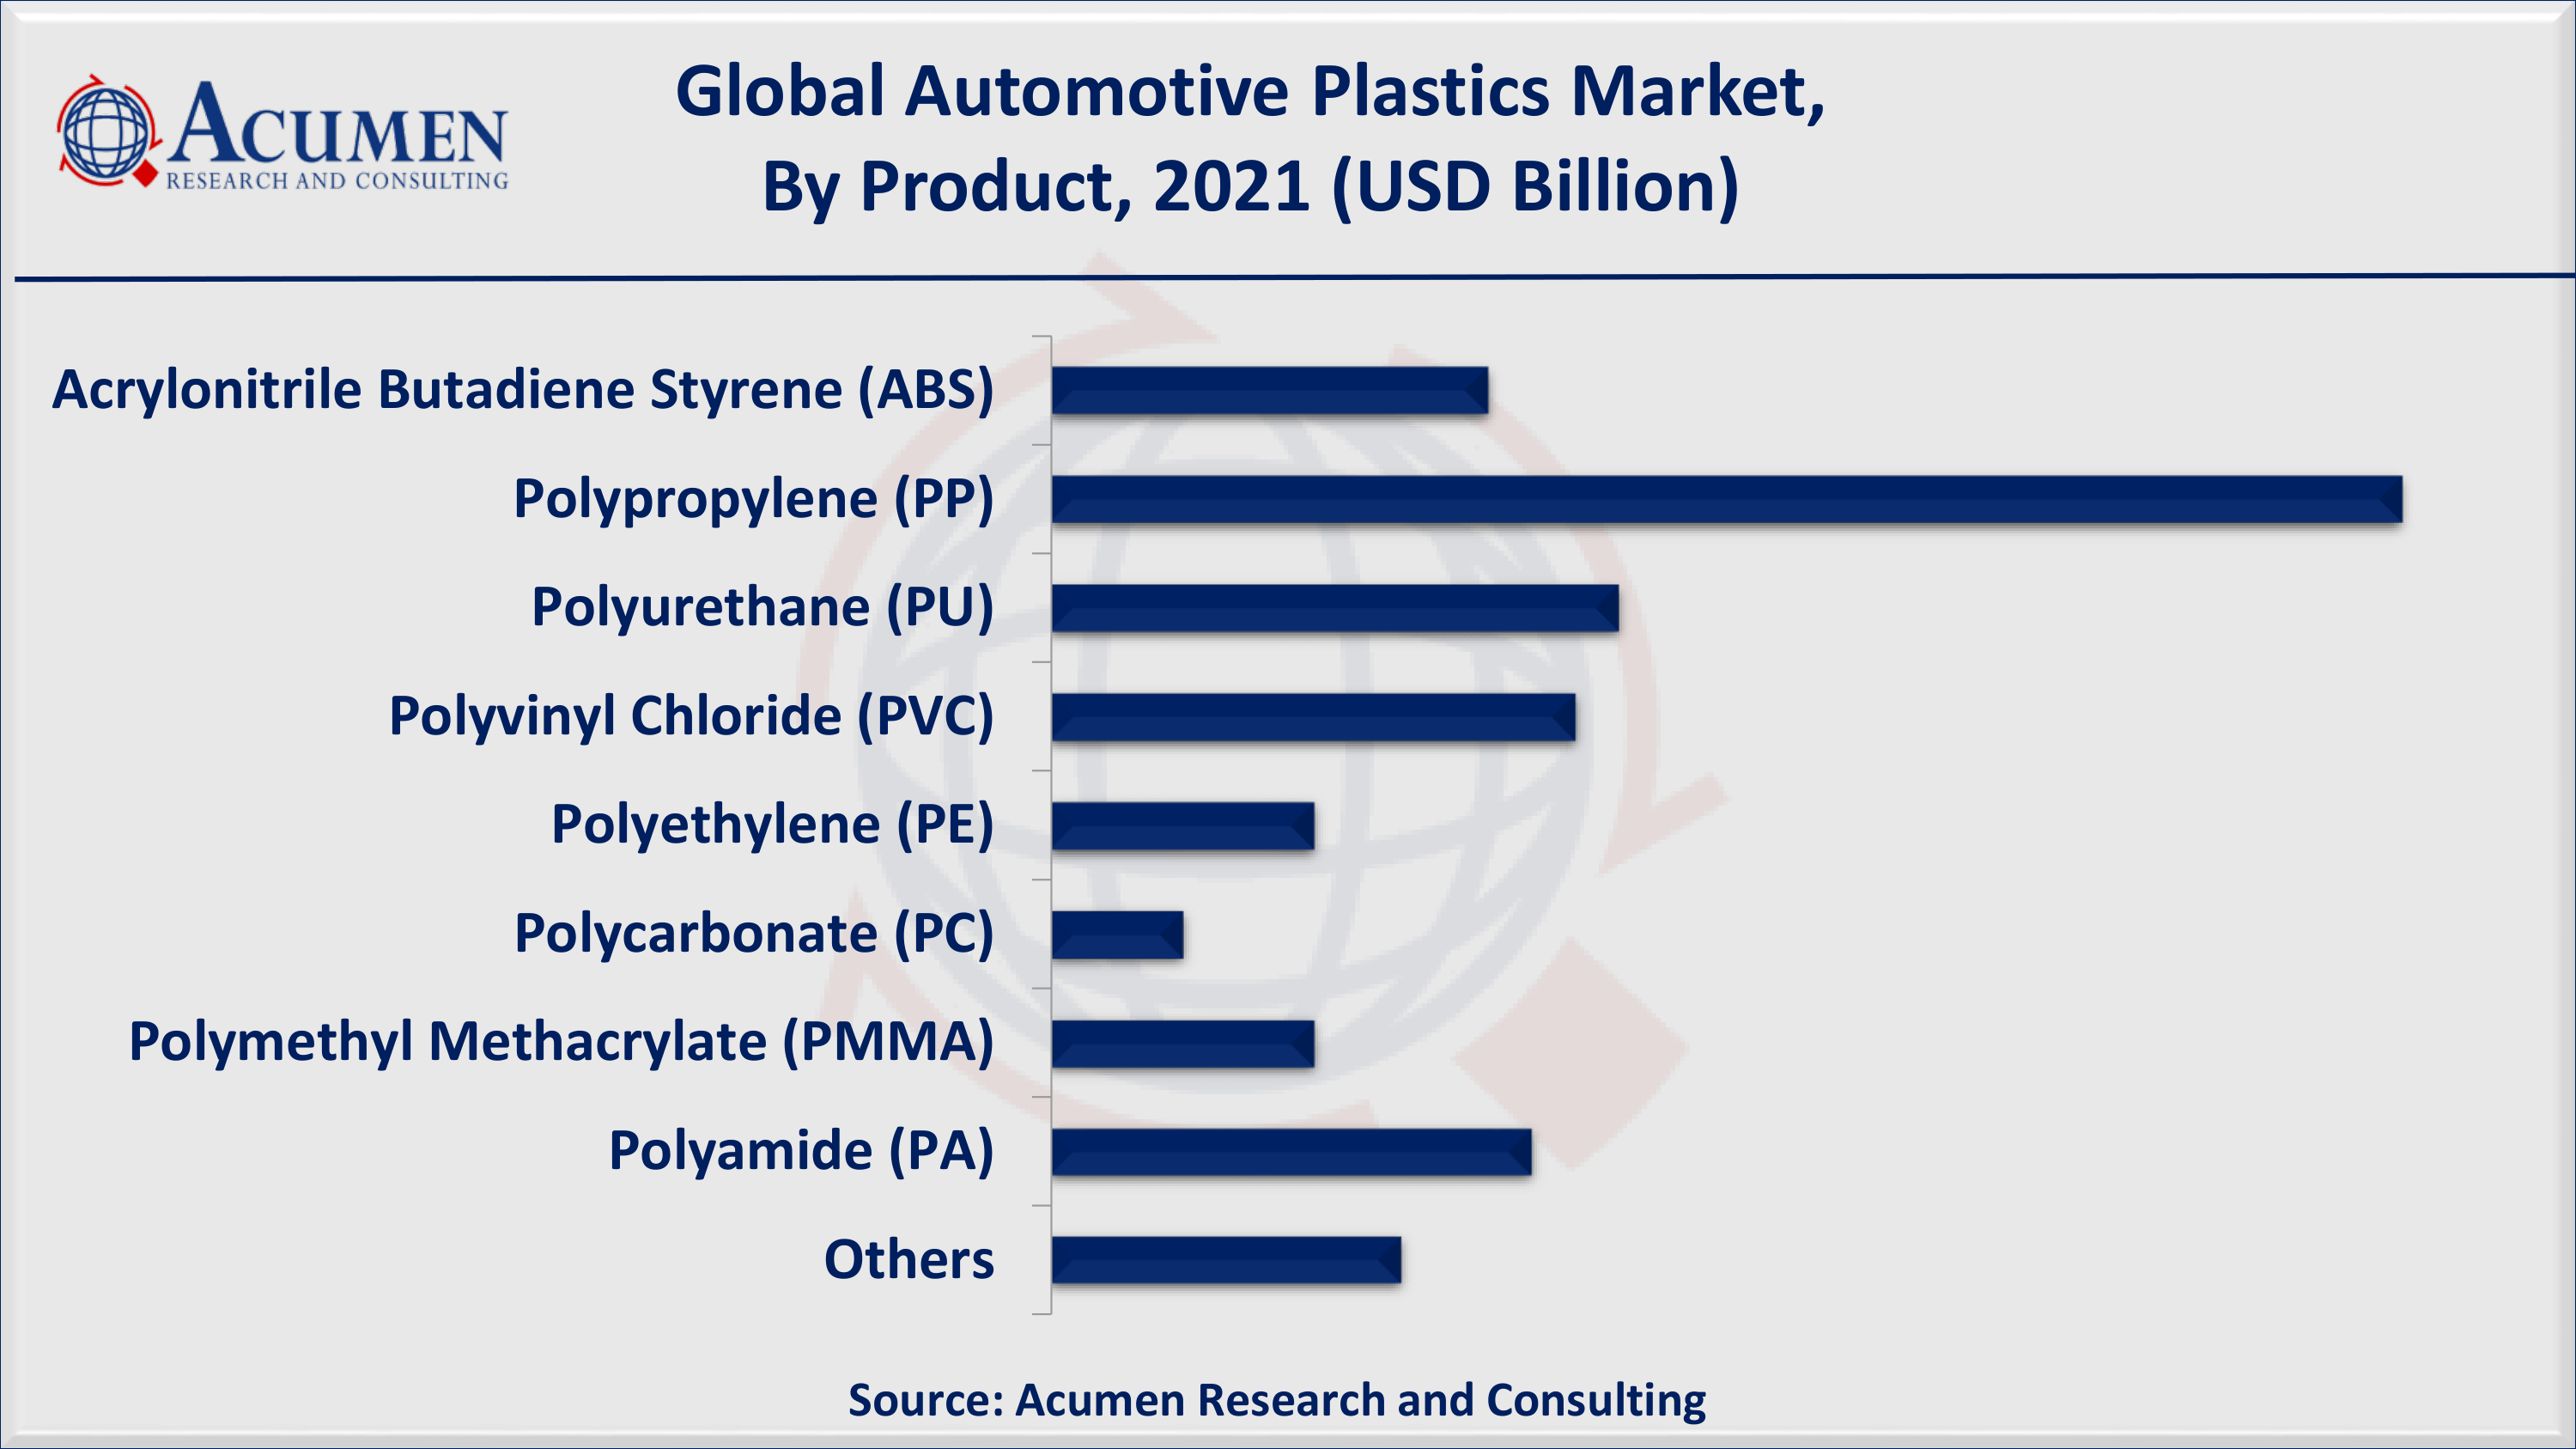 Based on product, polypropylene (PP) accounted for over 31% of the overall market share in 2021